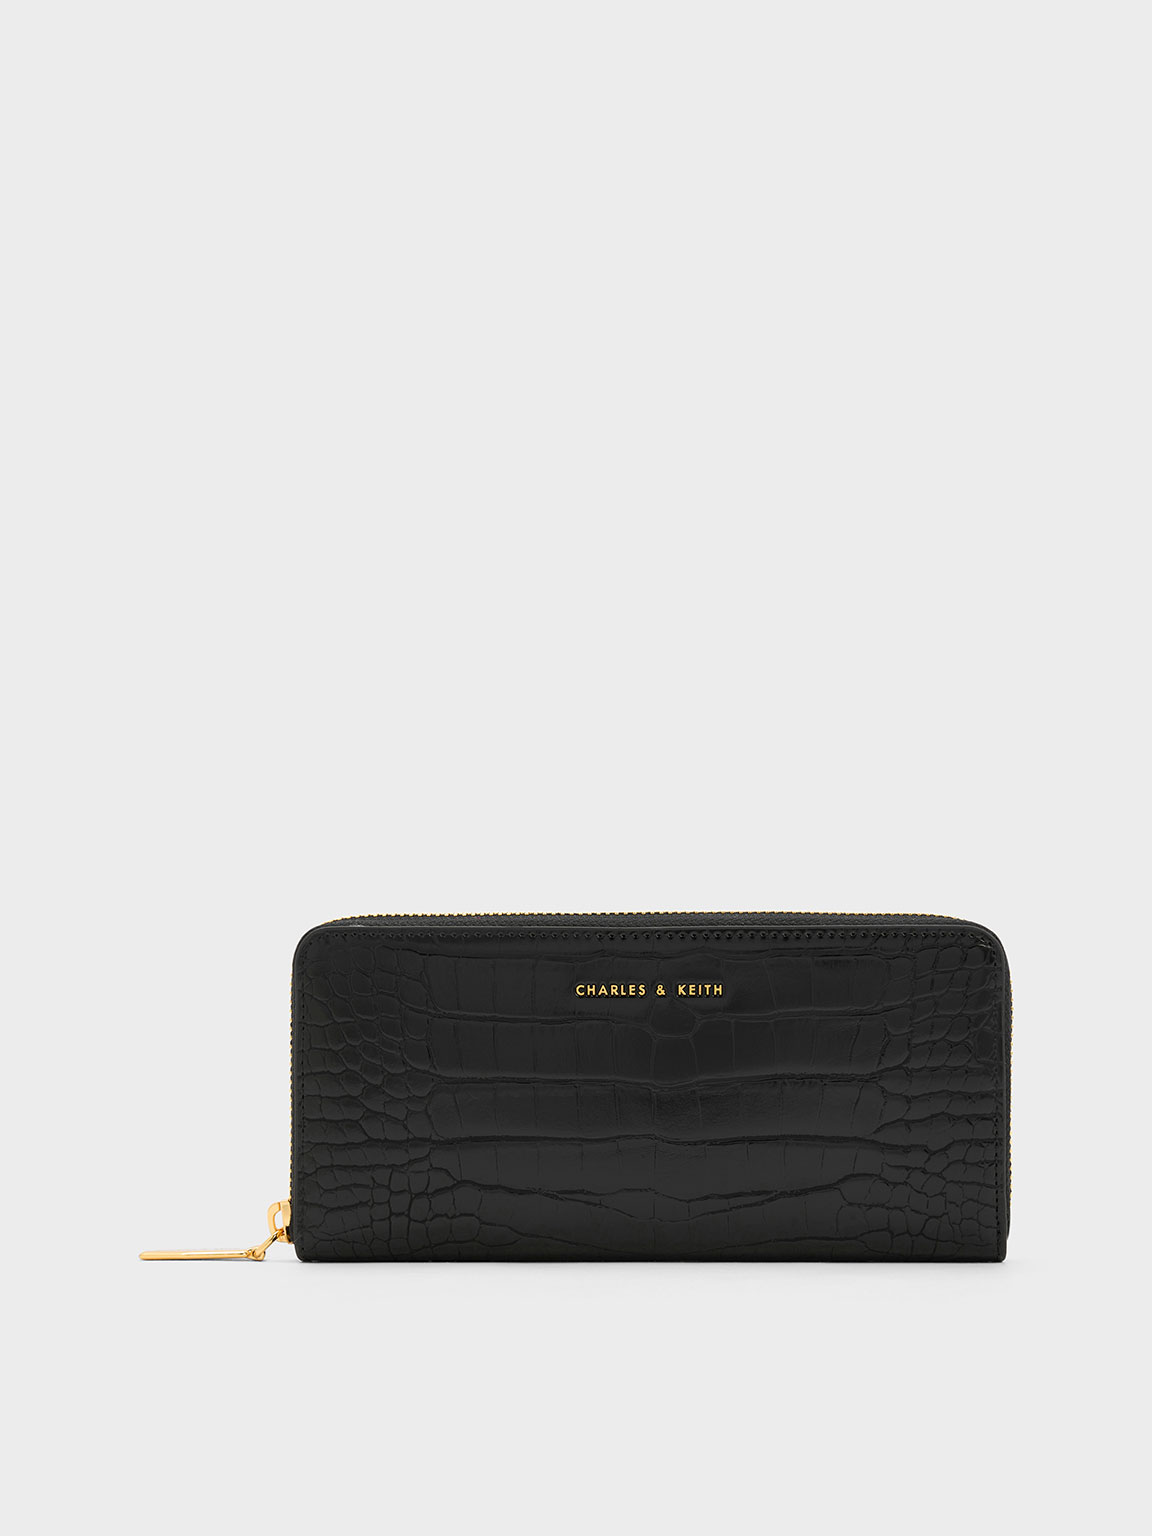 Charles and keith long wallet jfashioncollection